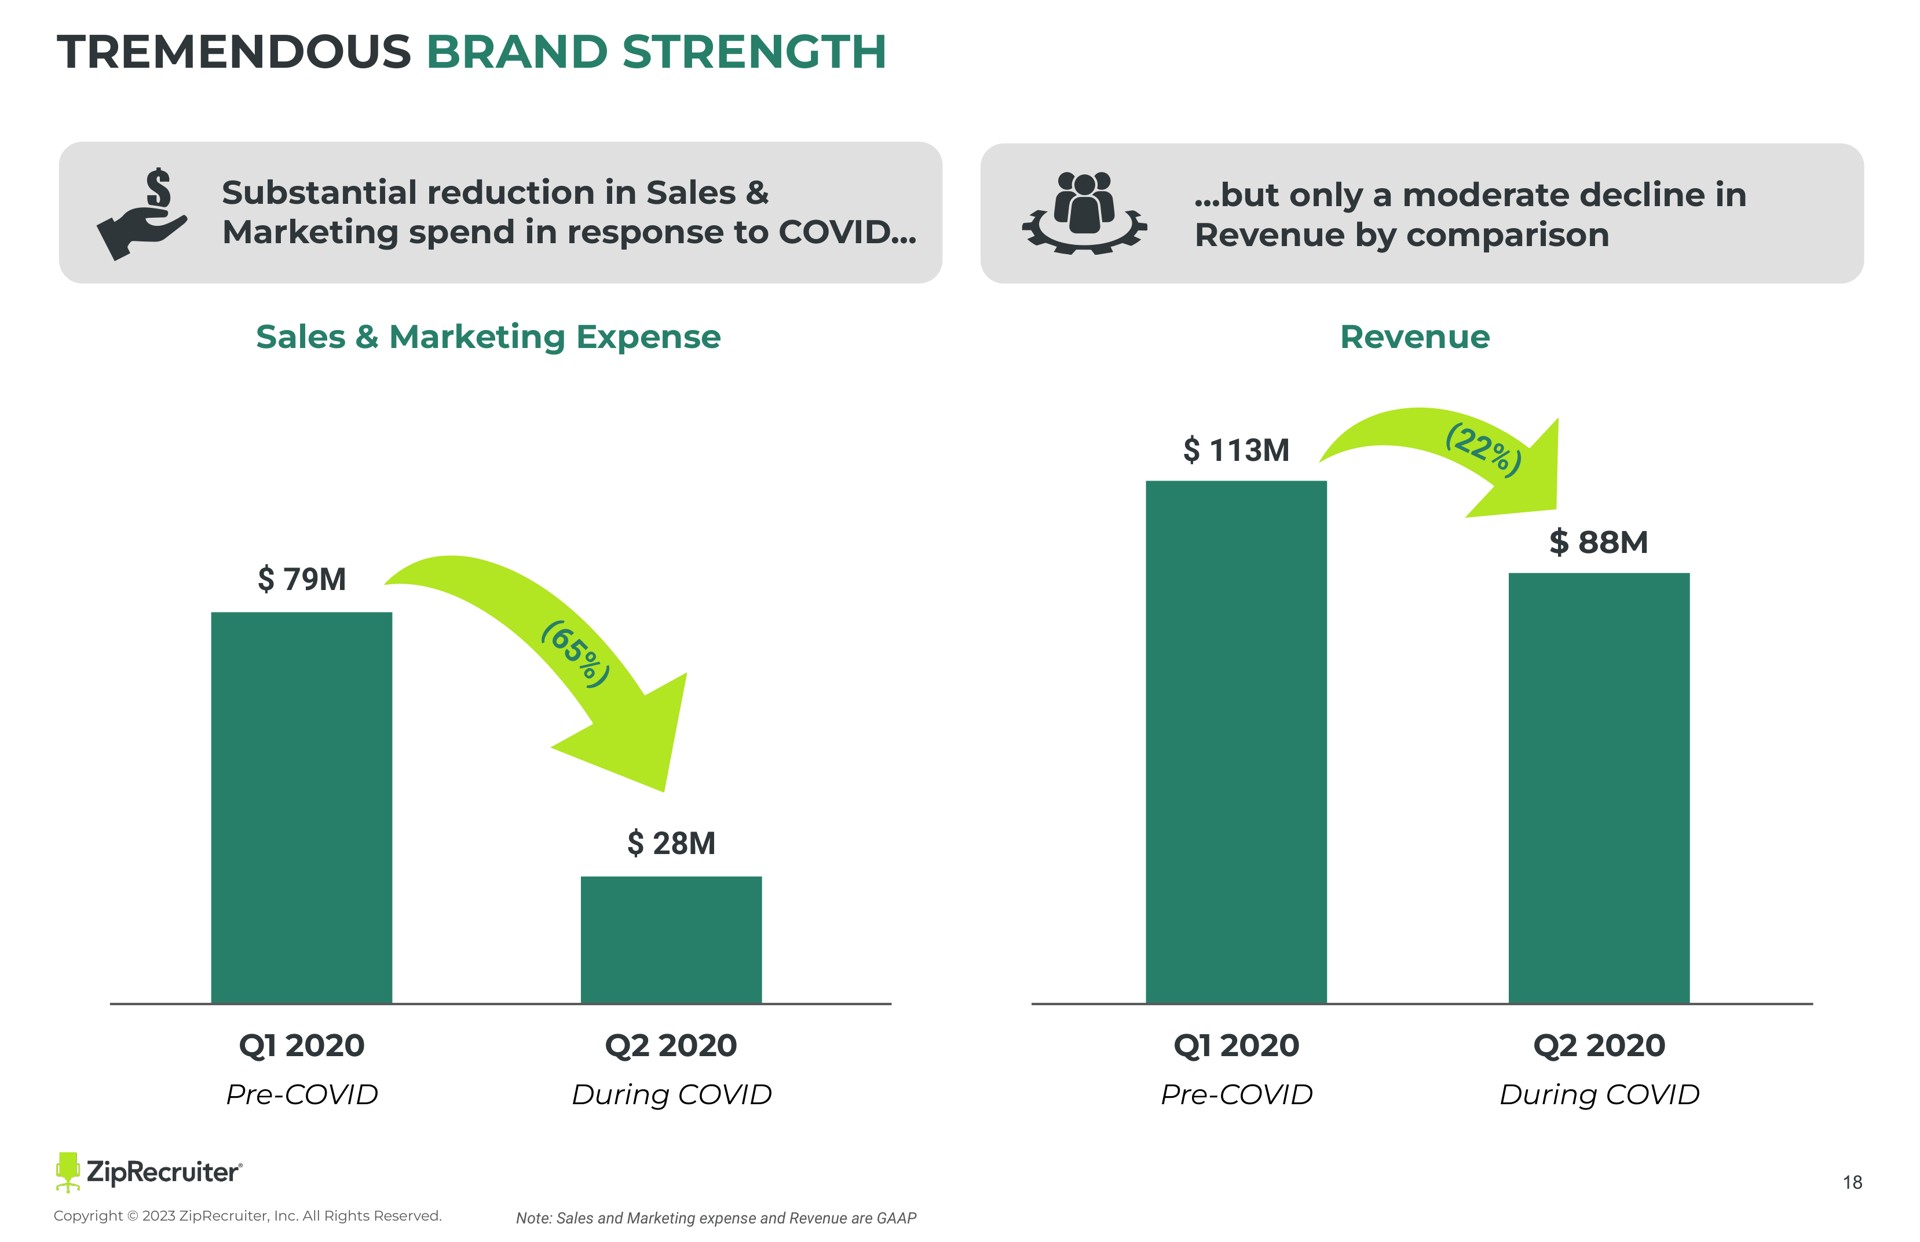 tremendous brand strength substantial reduction in sales marketing spend in response to covid but only a moderate decline in revenue by comparison sales marketing expense revenue covid during covid covid during covid rog | ZipRecruiter